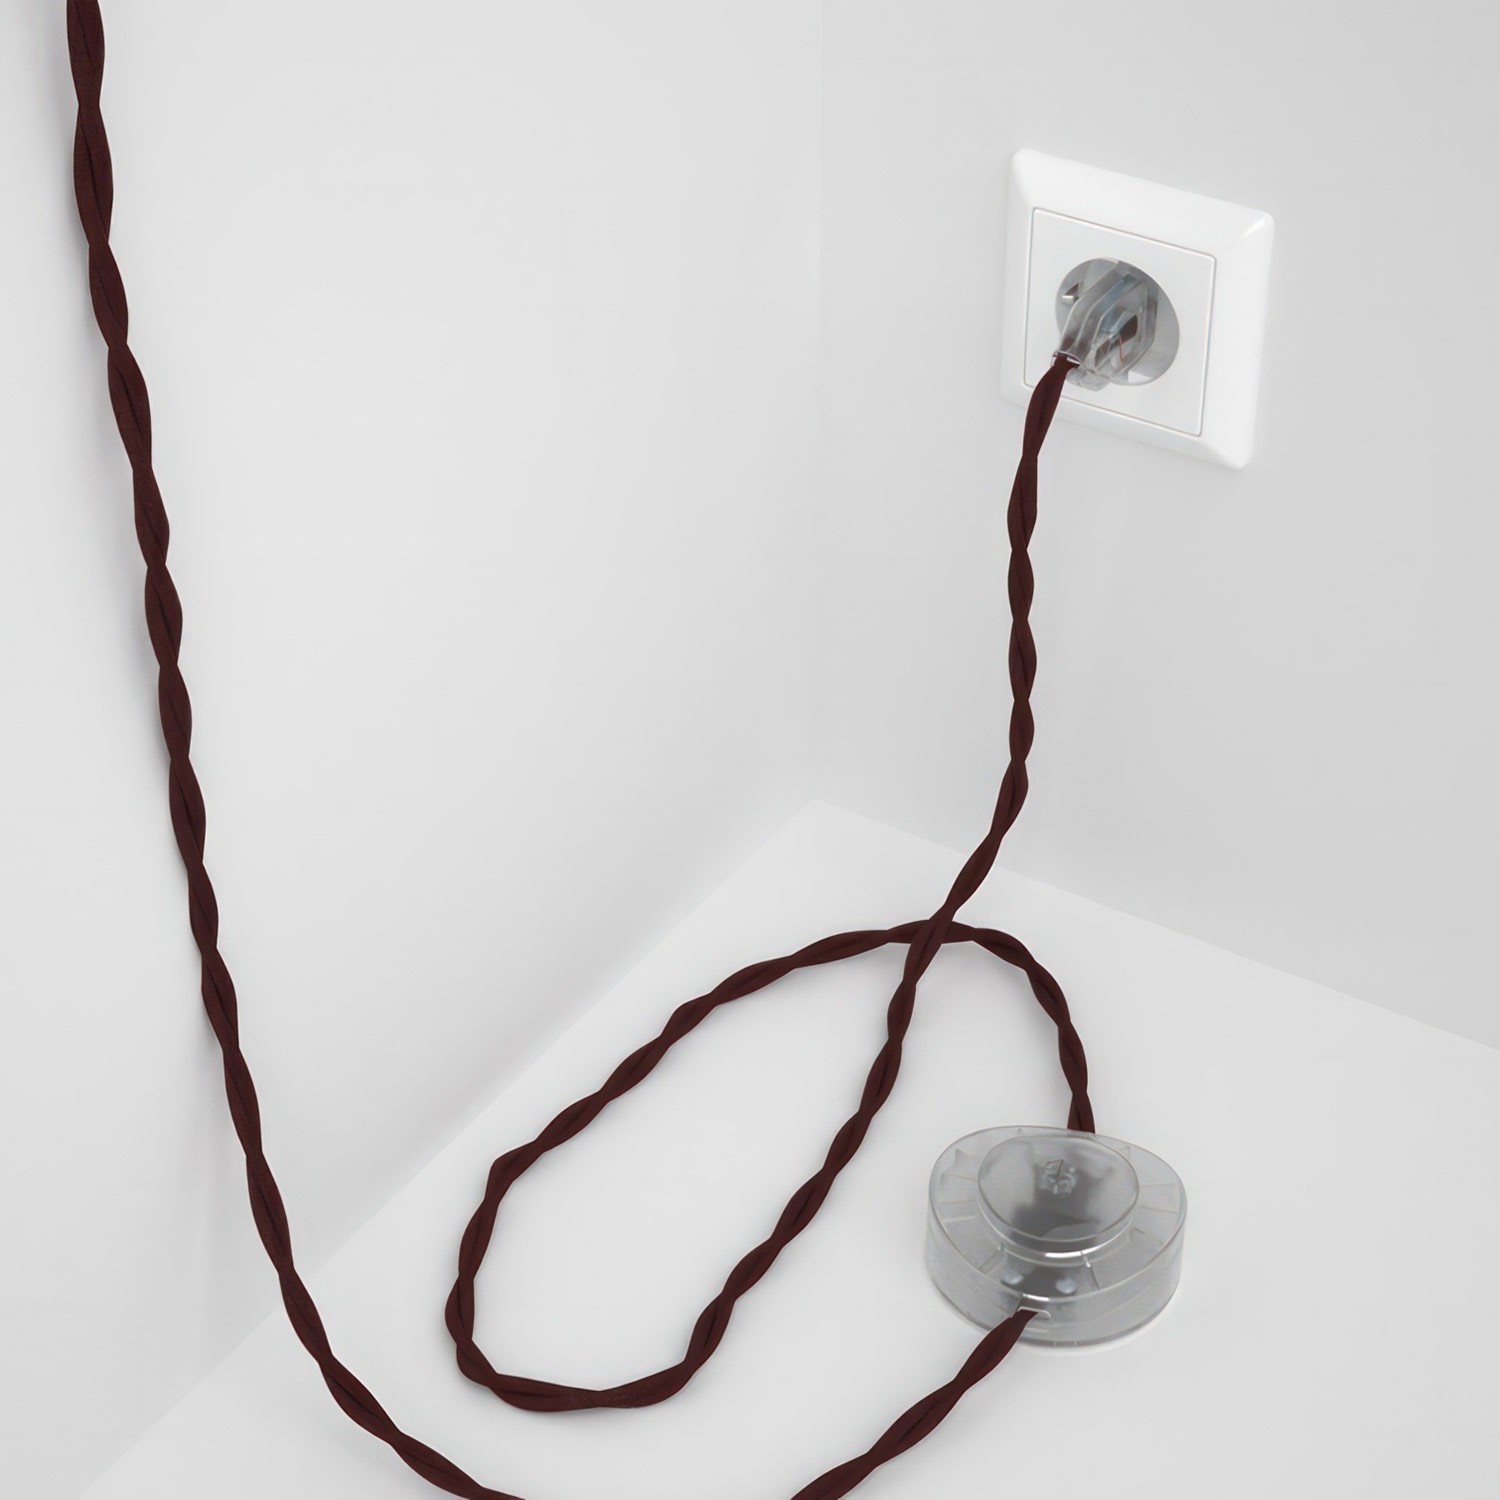 Wiring Pedestal, TM19 Burgundy Rayon 3 m. Choose the colour of the switch and plug.